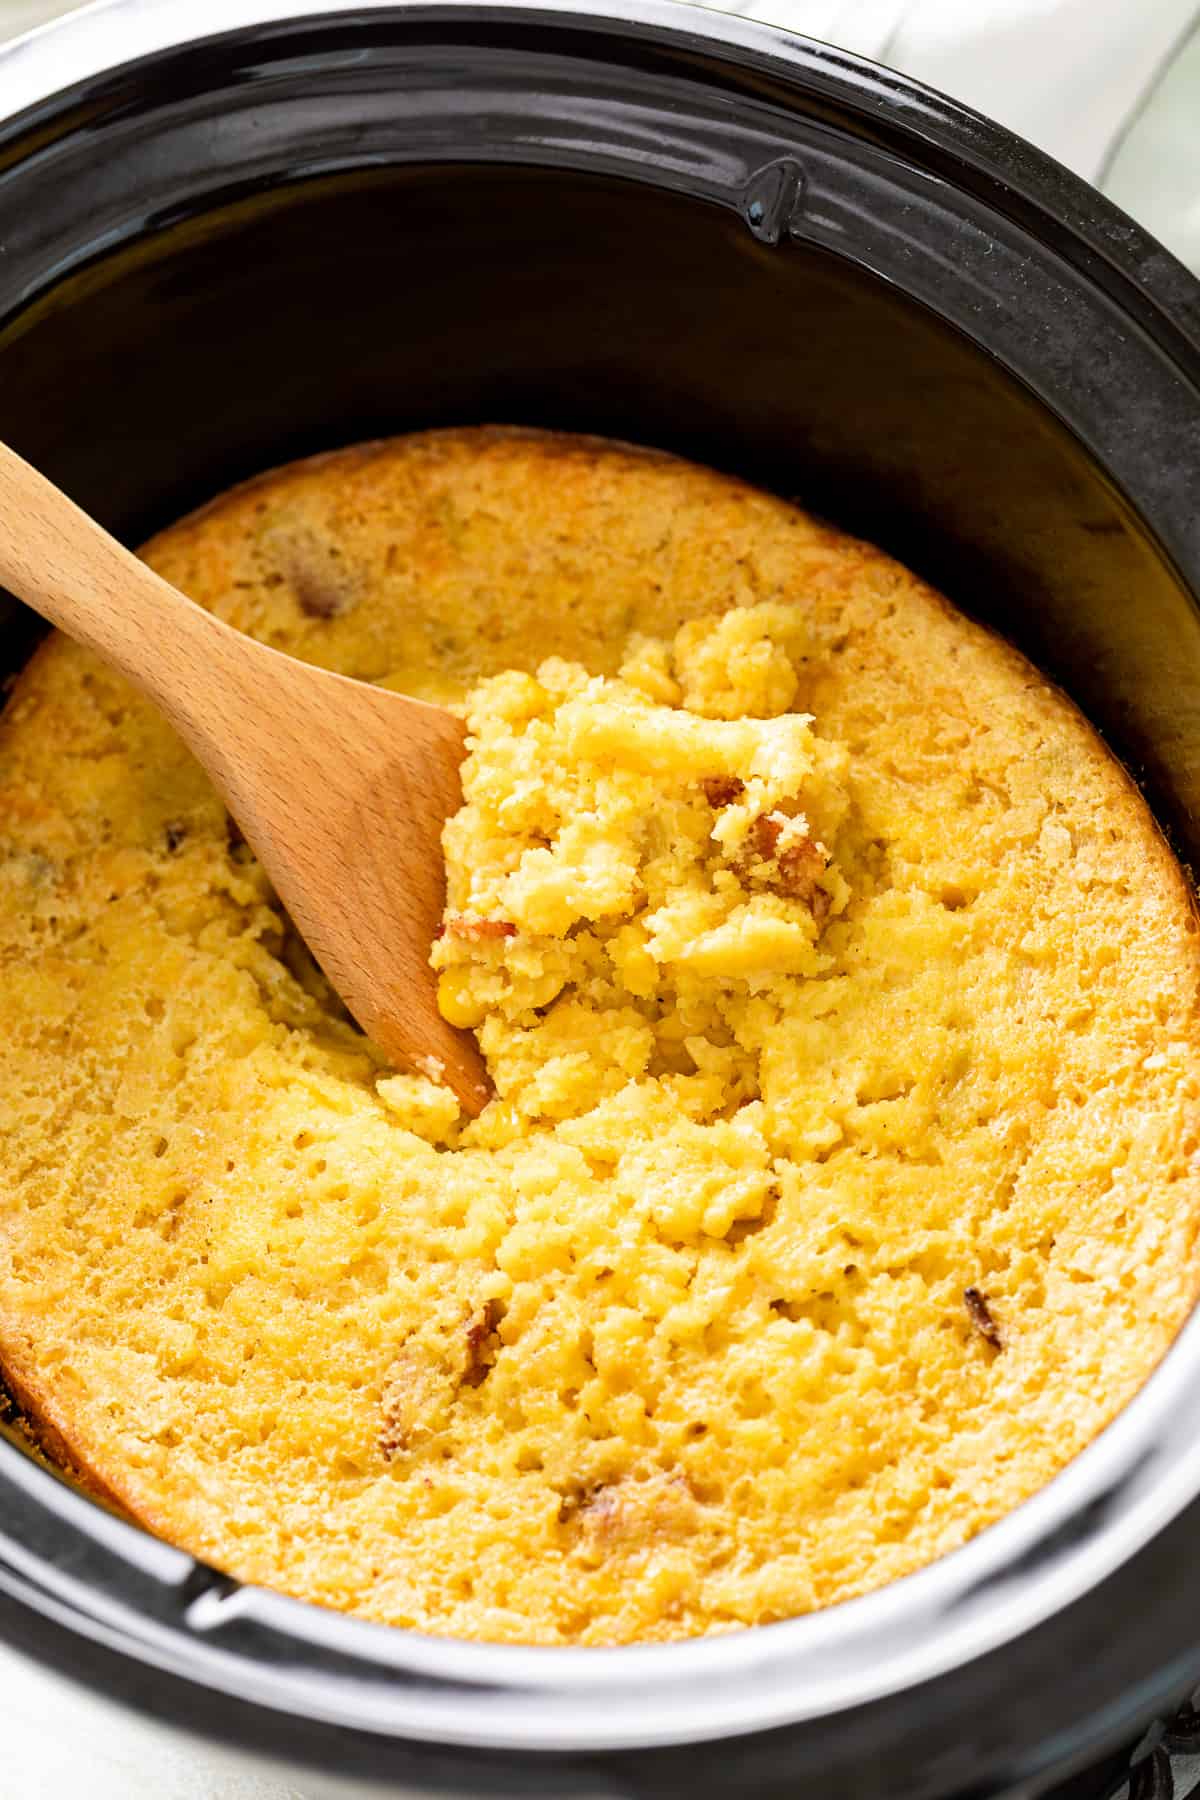 Wooden spoon scooping a helping of corn casserole.